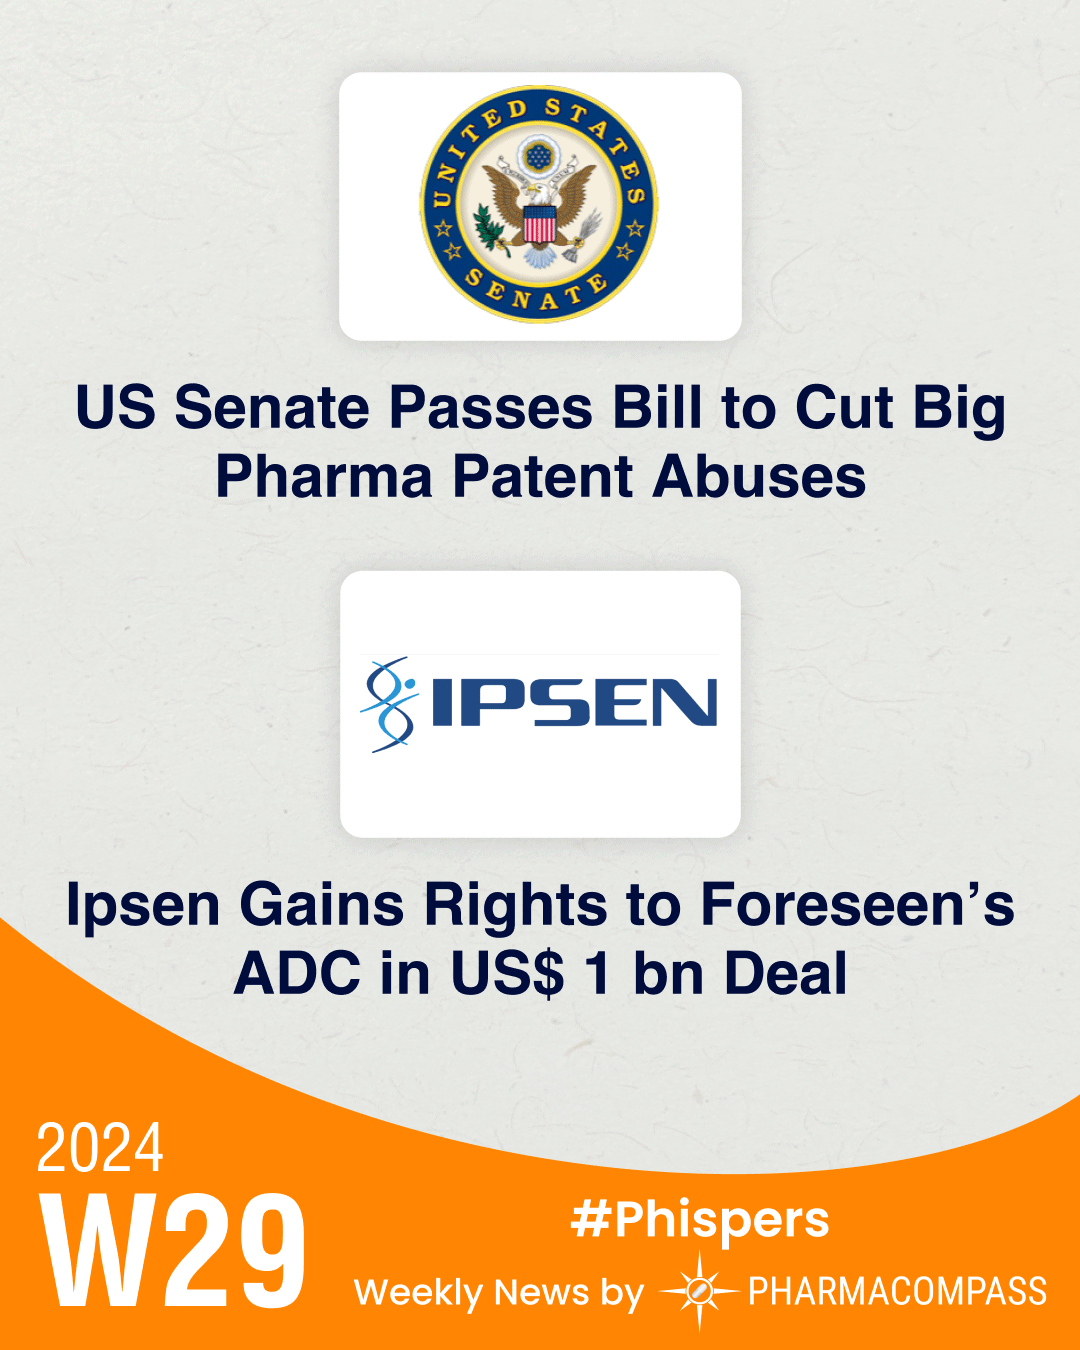 US Senate passes bipartisan bill to cut pharma patent abuses; Ipsen inks another ADC deal